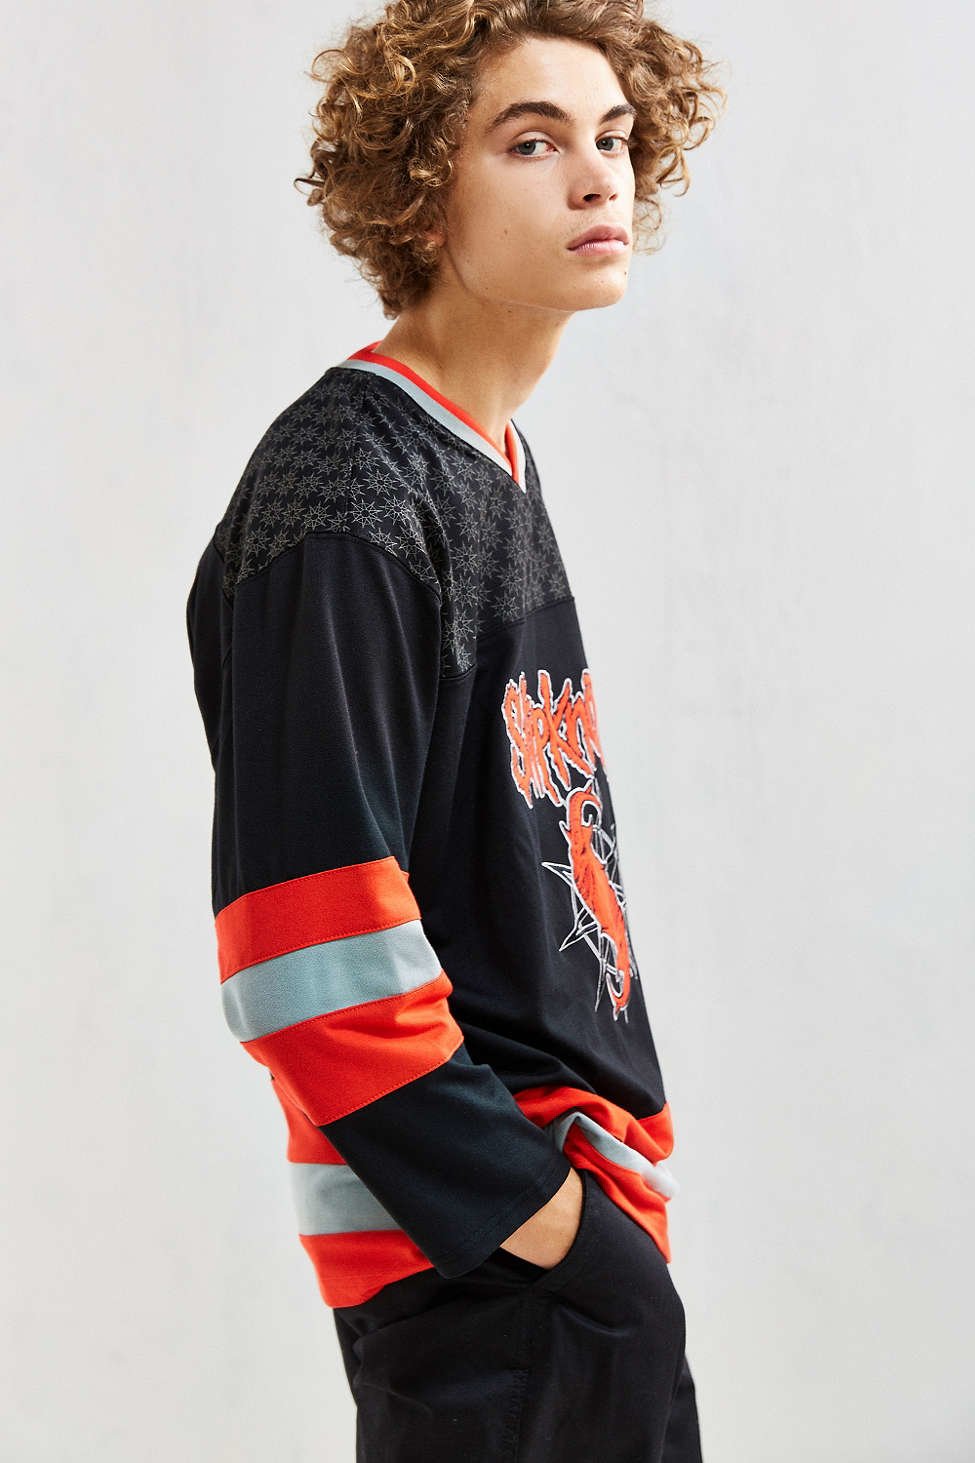 hockey jersey outfit